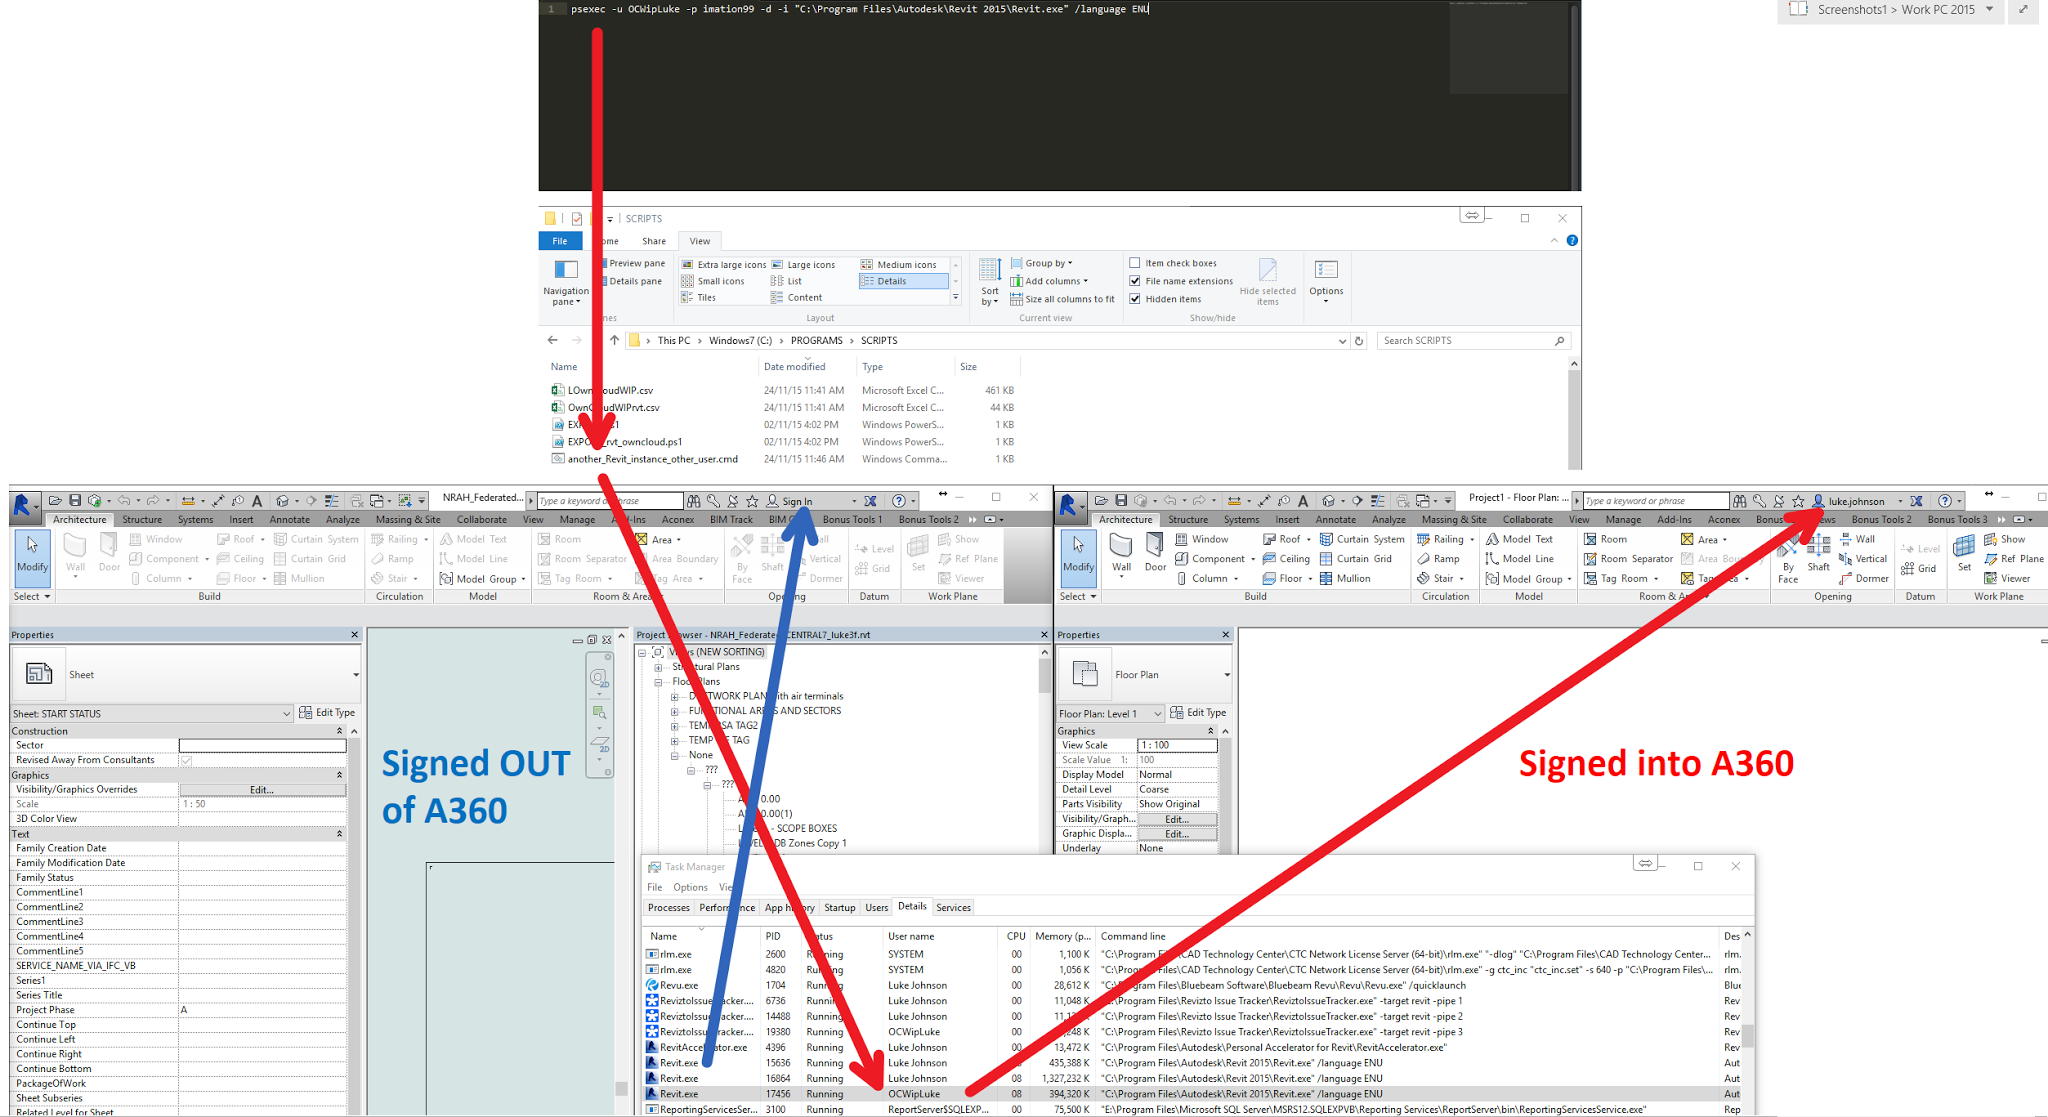 How to Workaround A360 SSO issues by Running another Instance of Revit in Same Windows Session as different User